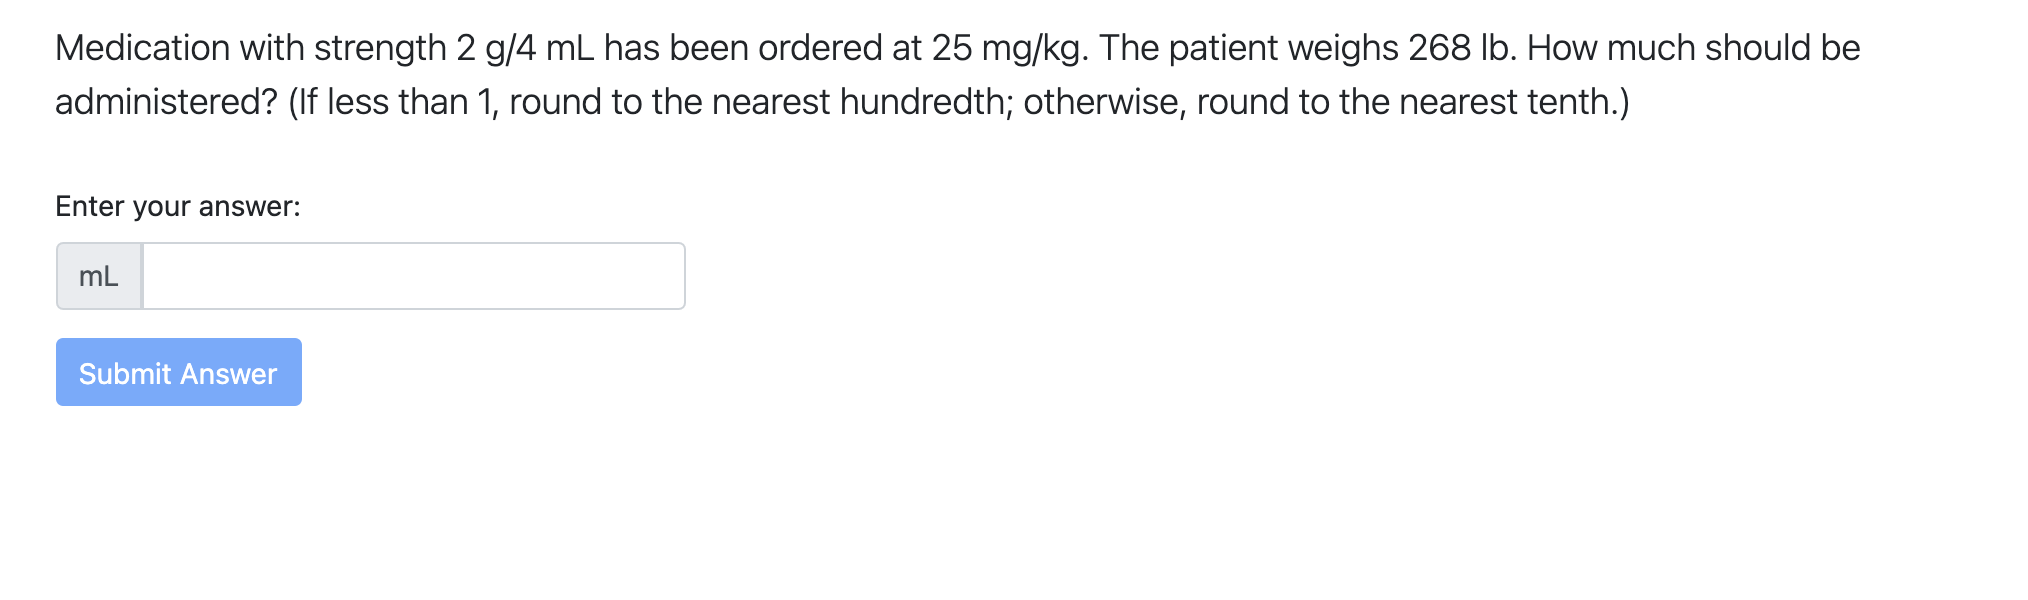 Medication With Strength 2 G 4 Ml Has Been Ordered At 25 Mg Kg The Patient Weighs 268 Lb How Much Should Be Administer 1